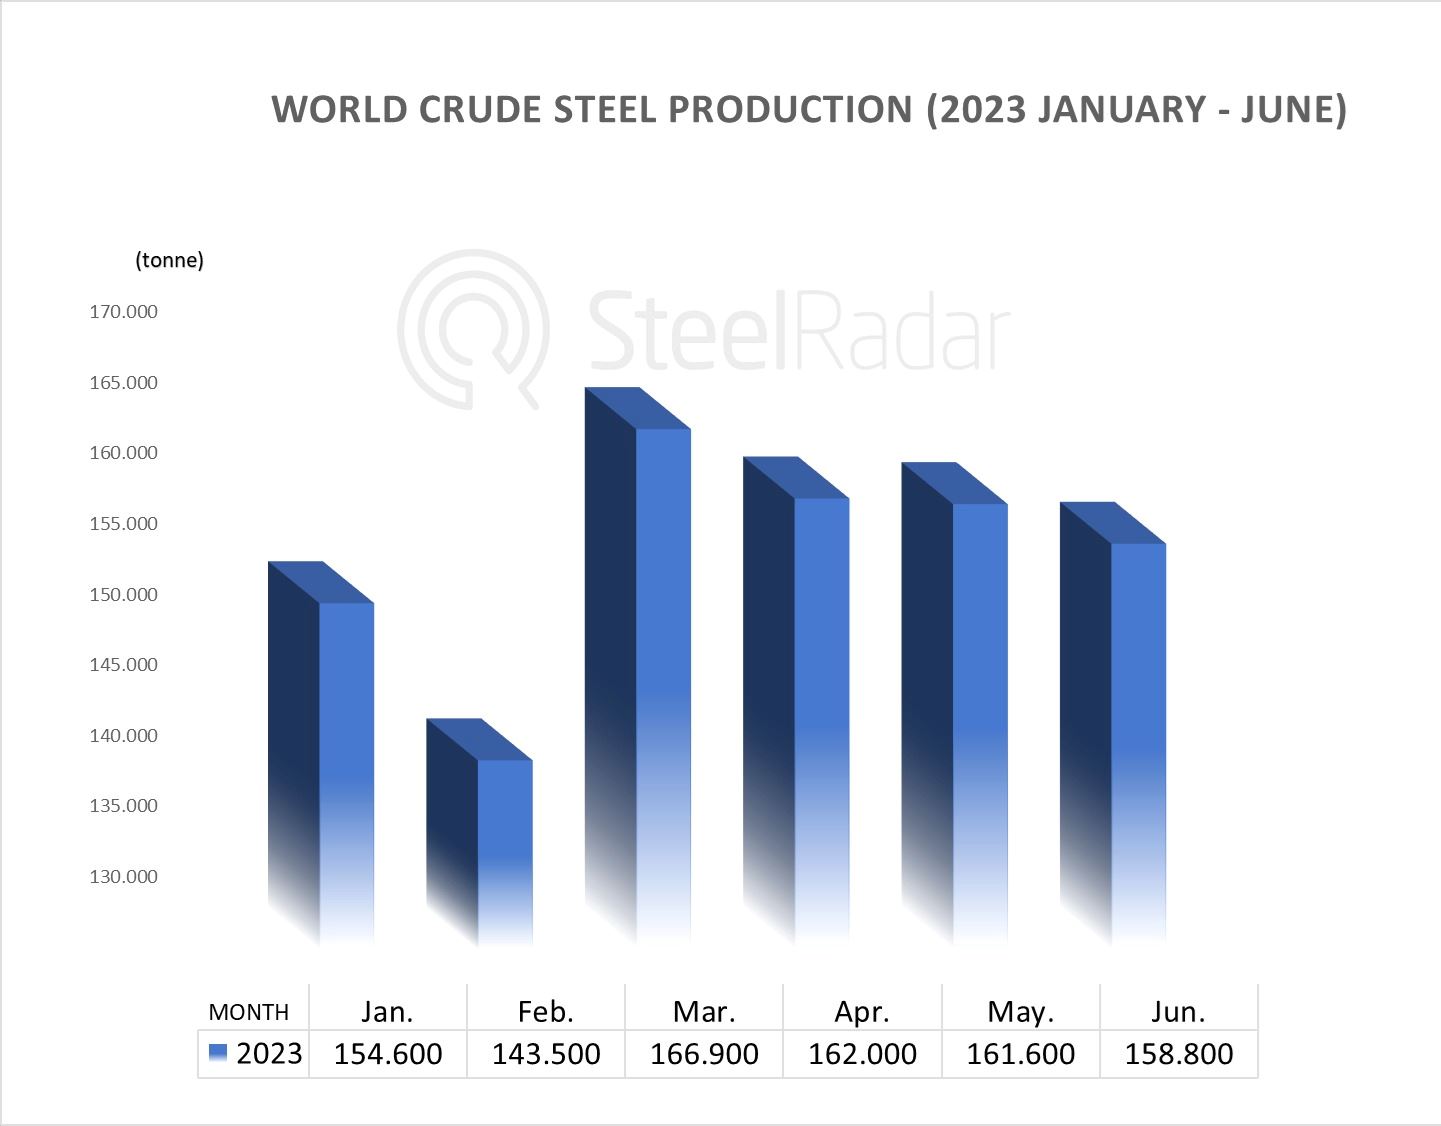 World crude steel production decreased by 1.73 per cent in June 2023